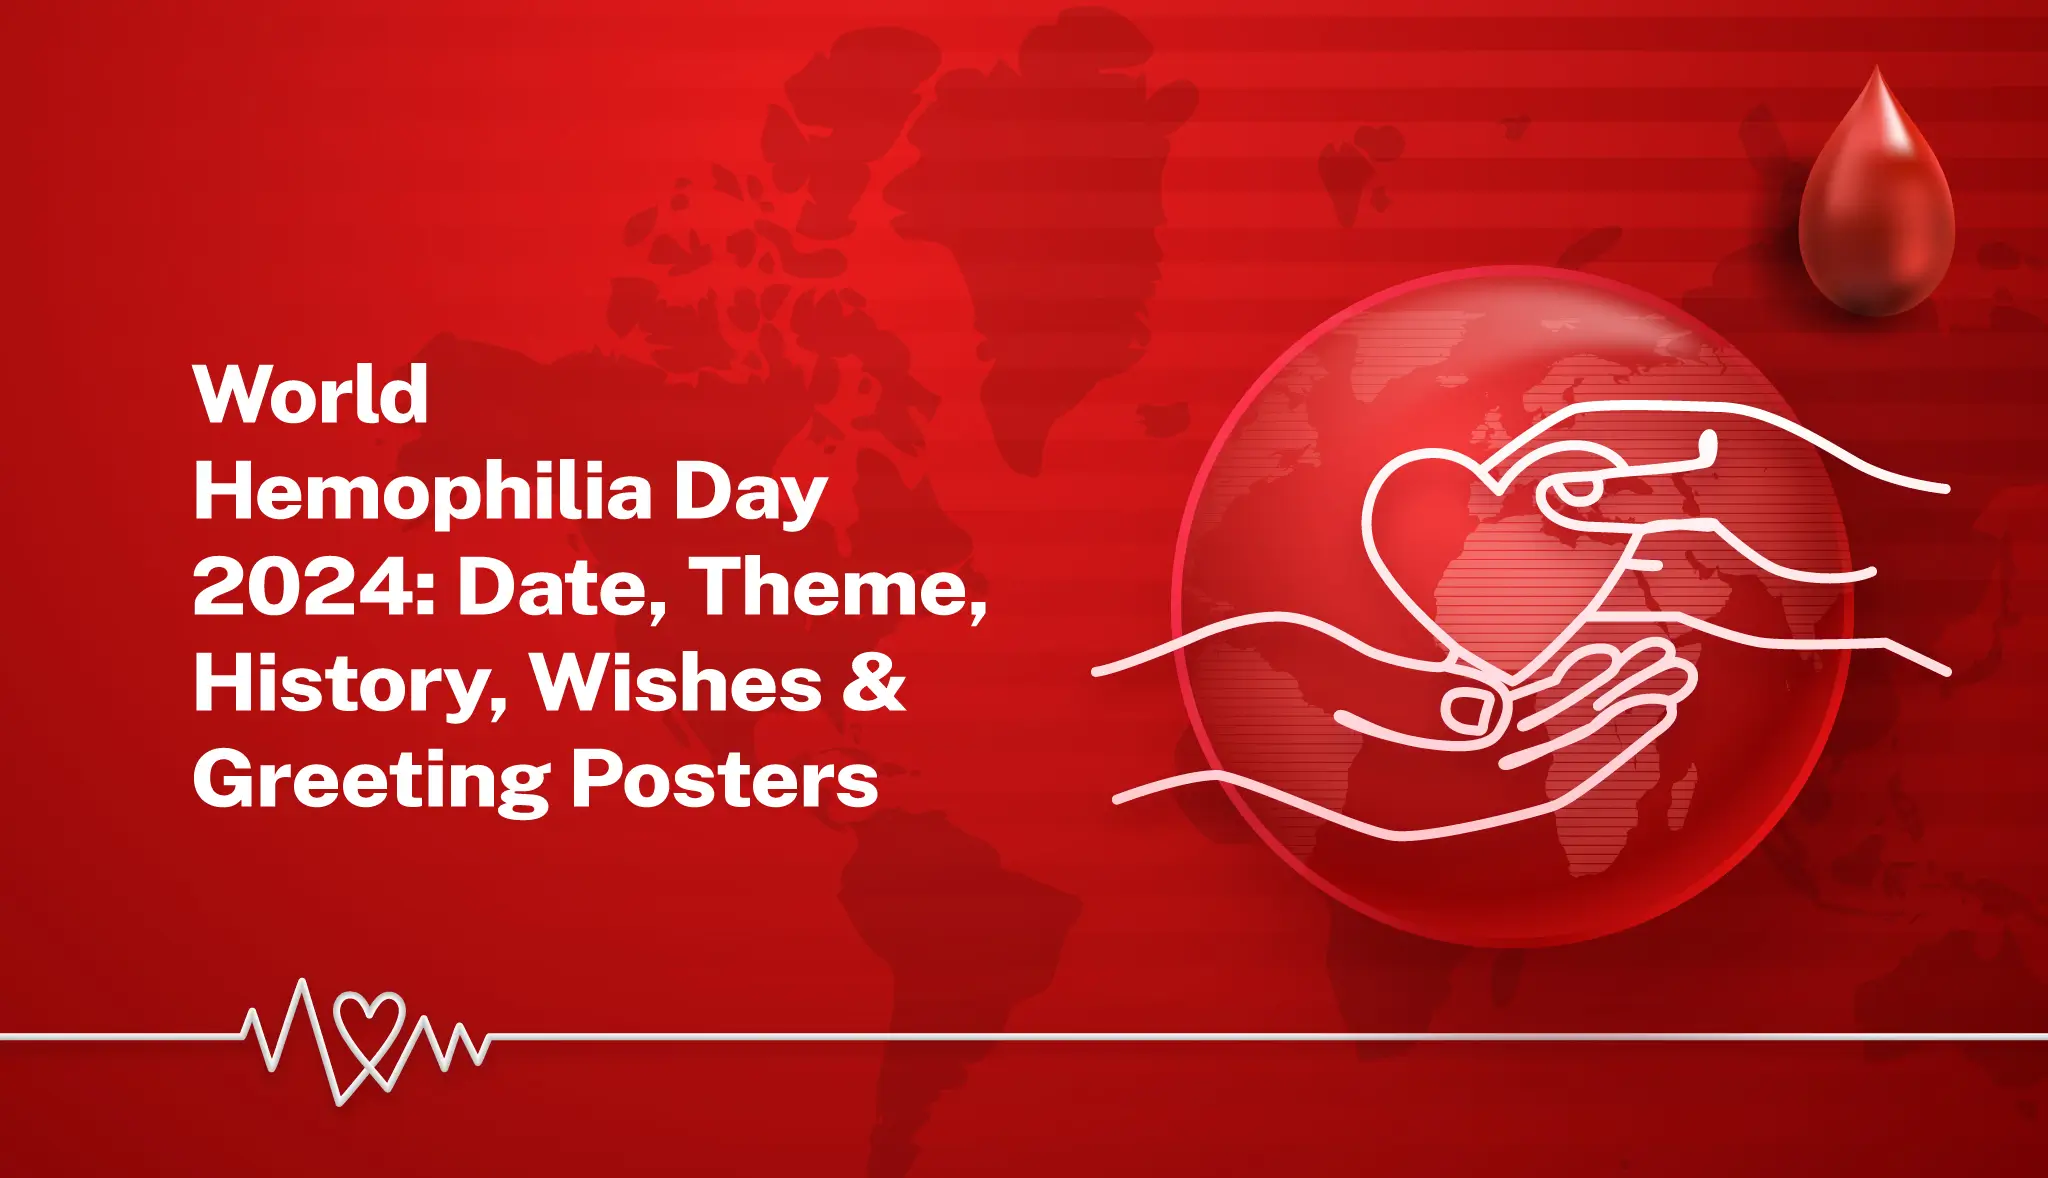 World Hemophilia Day 2024: Date, Theme, History & Wishes Posters - Postive